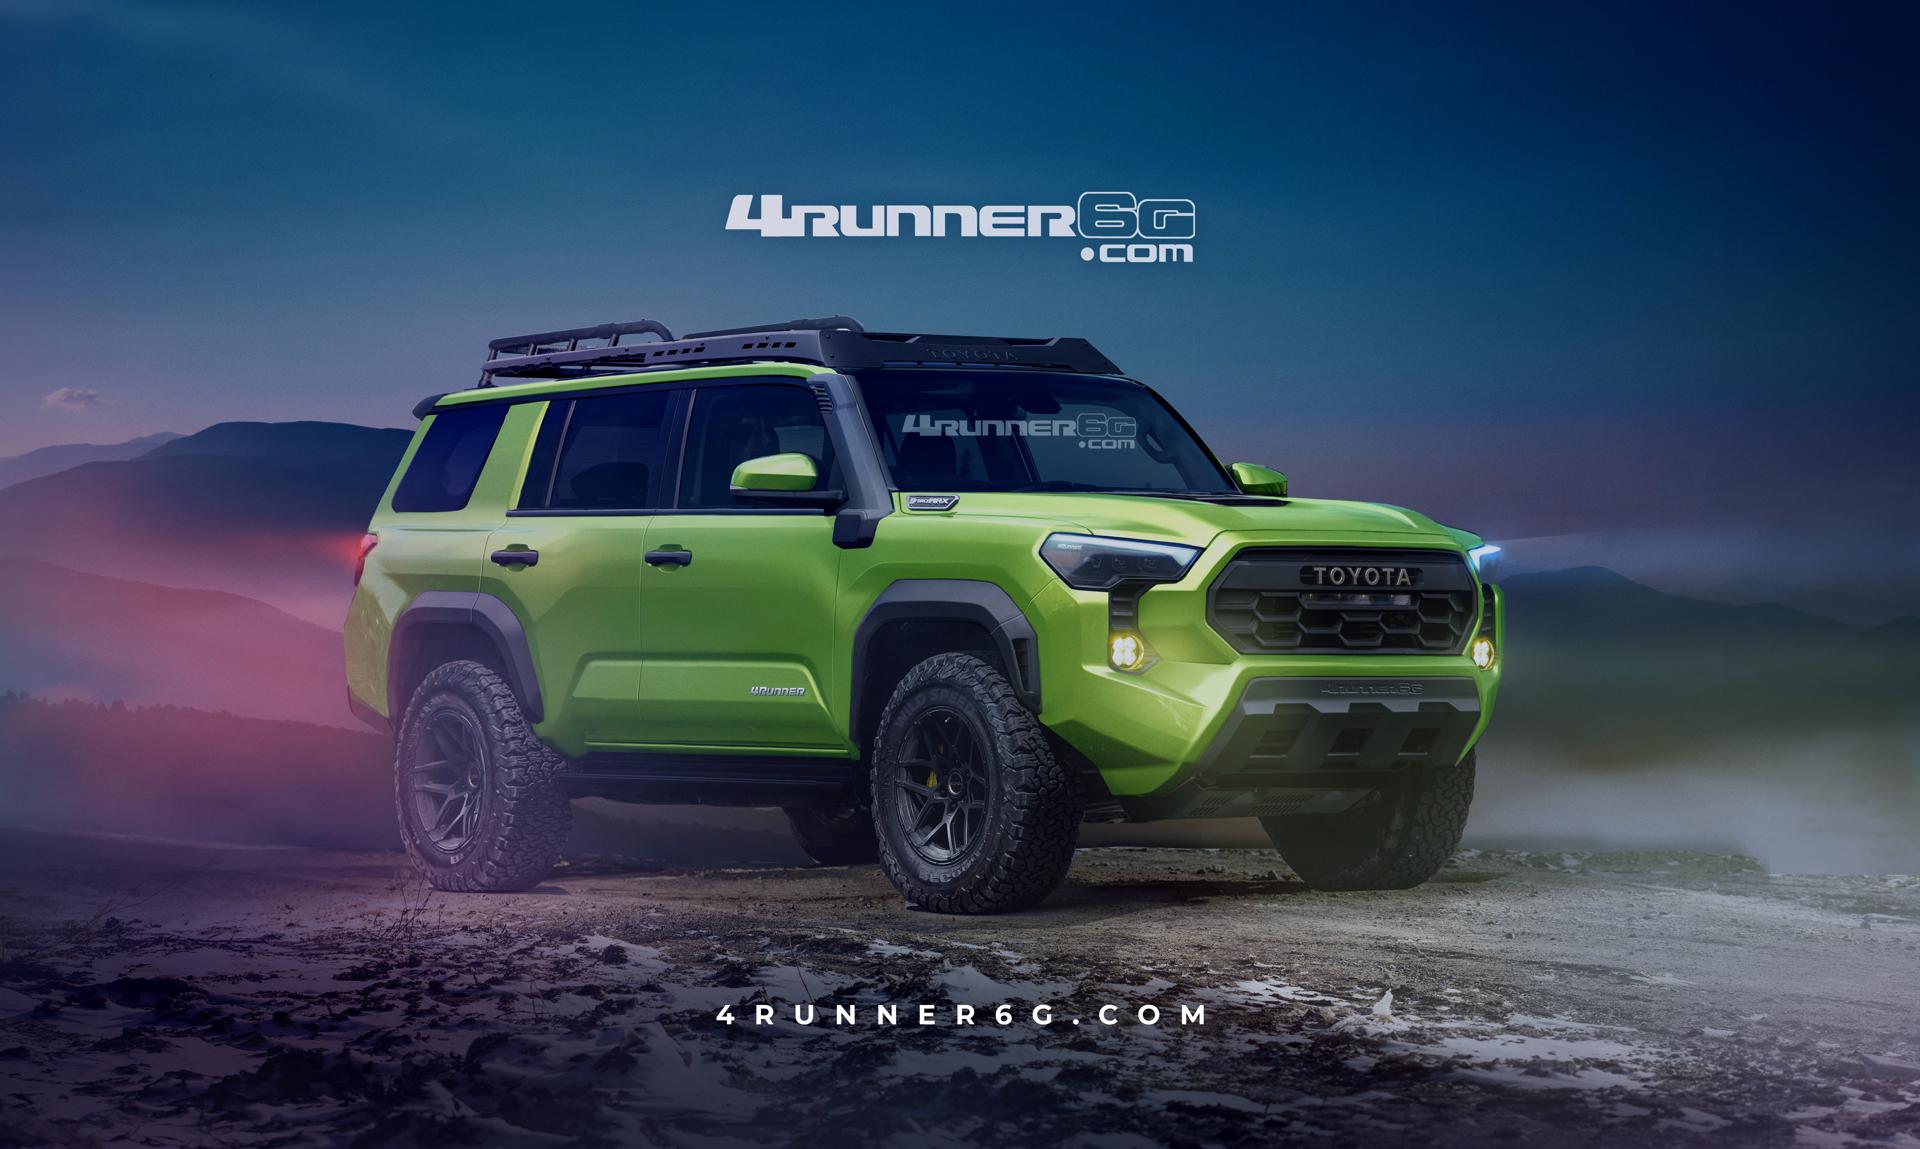 2025 Toyota 4runner New 2025 4Runner article with rendering 2025 Toyota-4Runner-Front-Electric-Lime